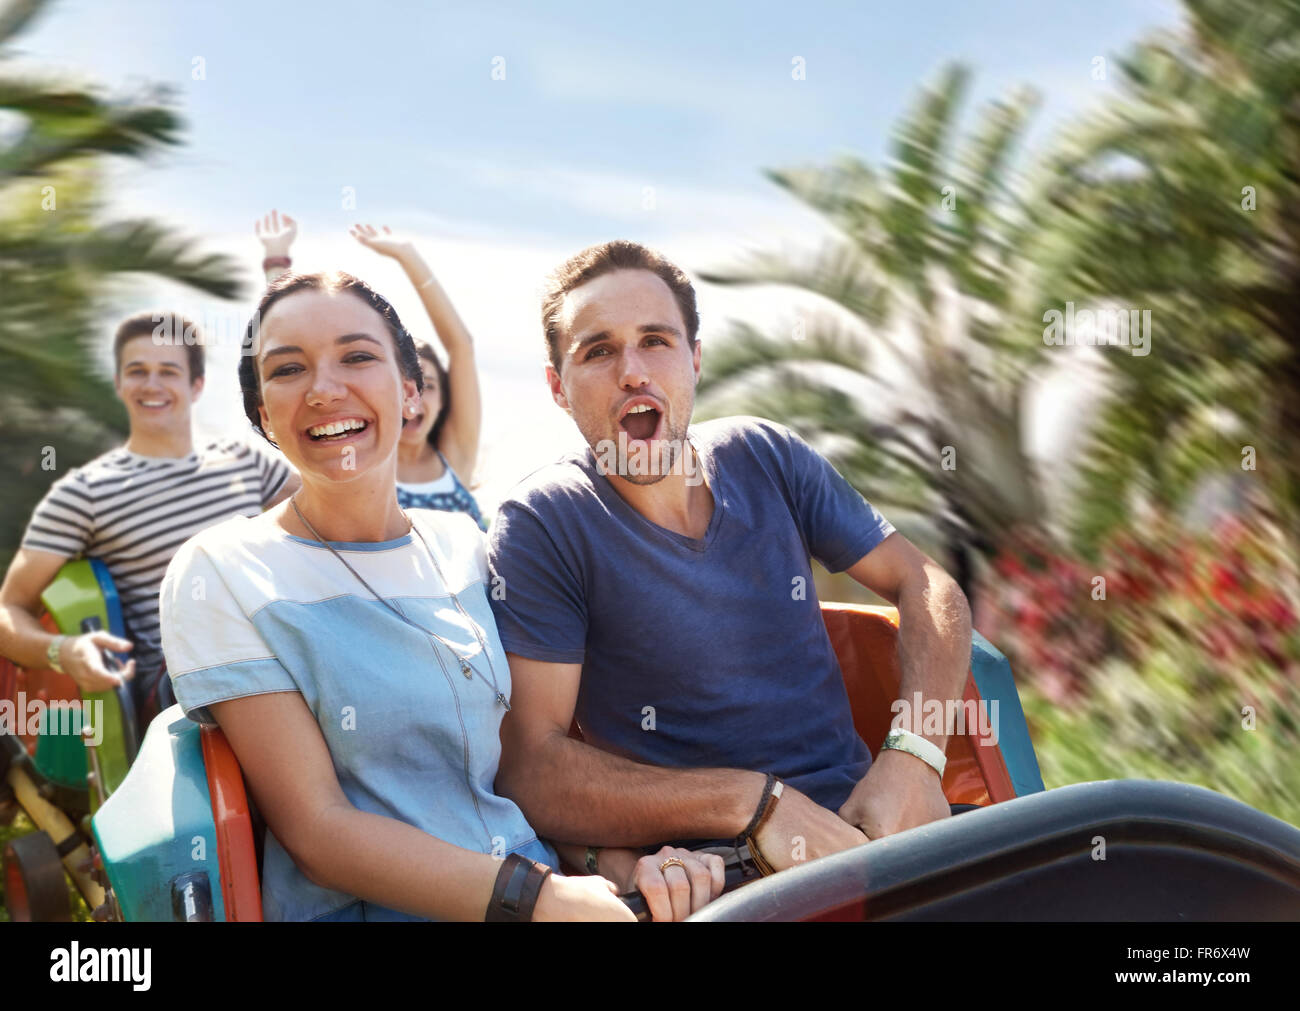 Young couple cheering on amusement park ride Stock Photo